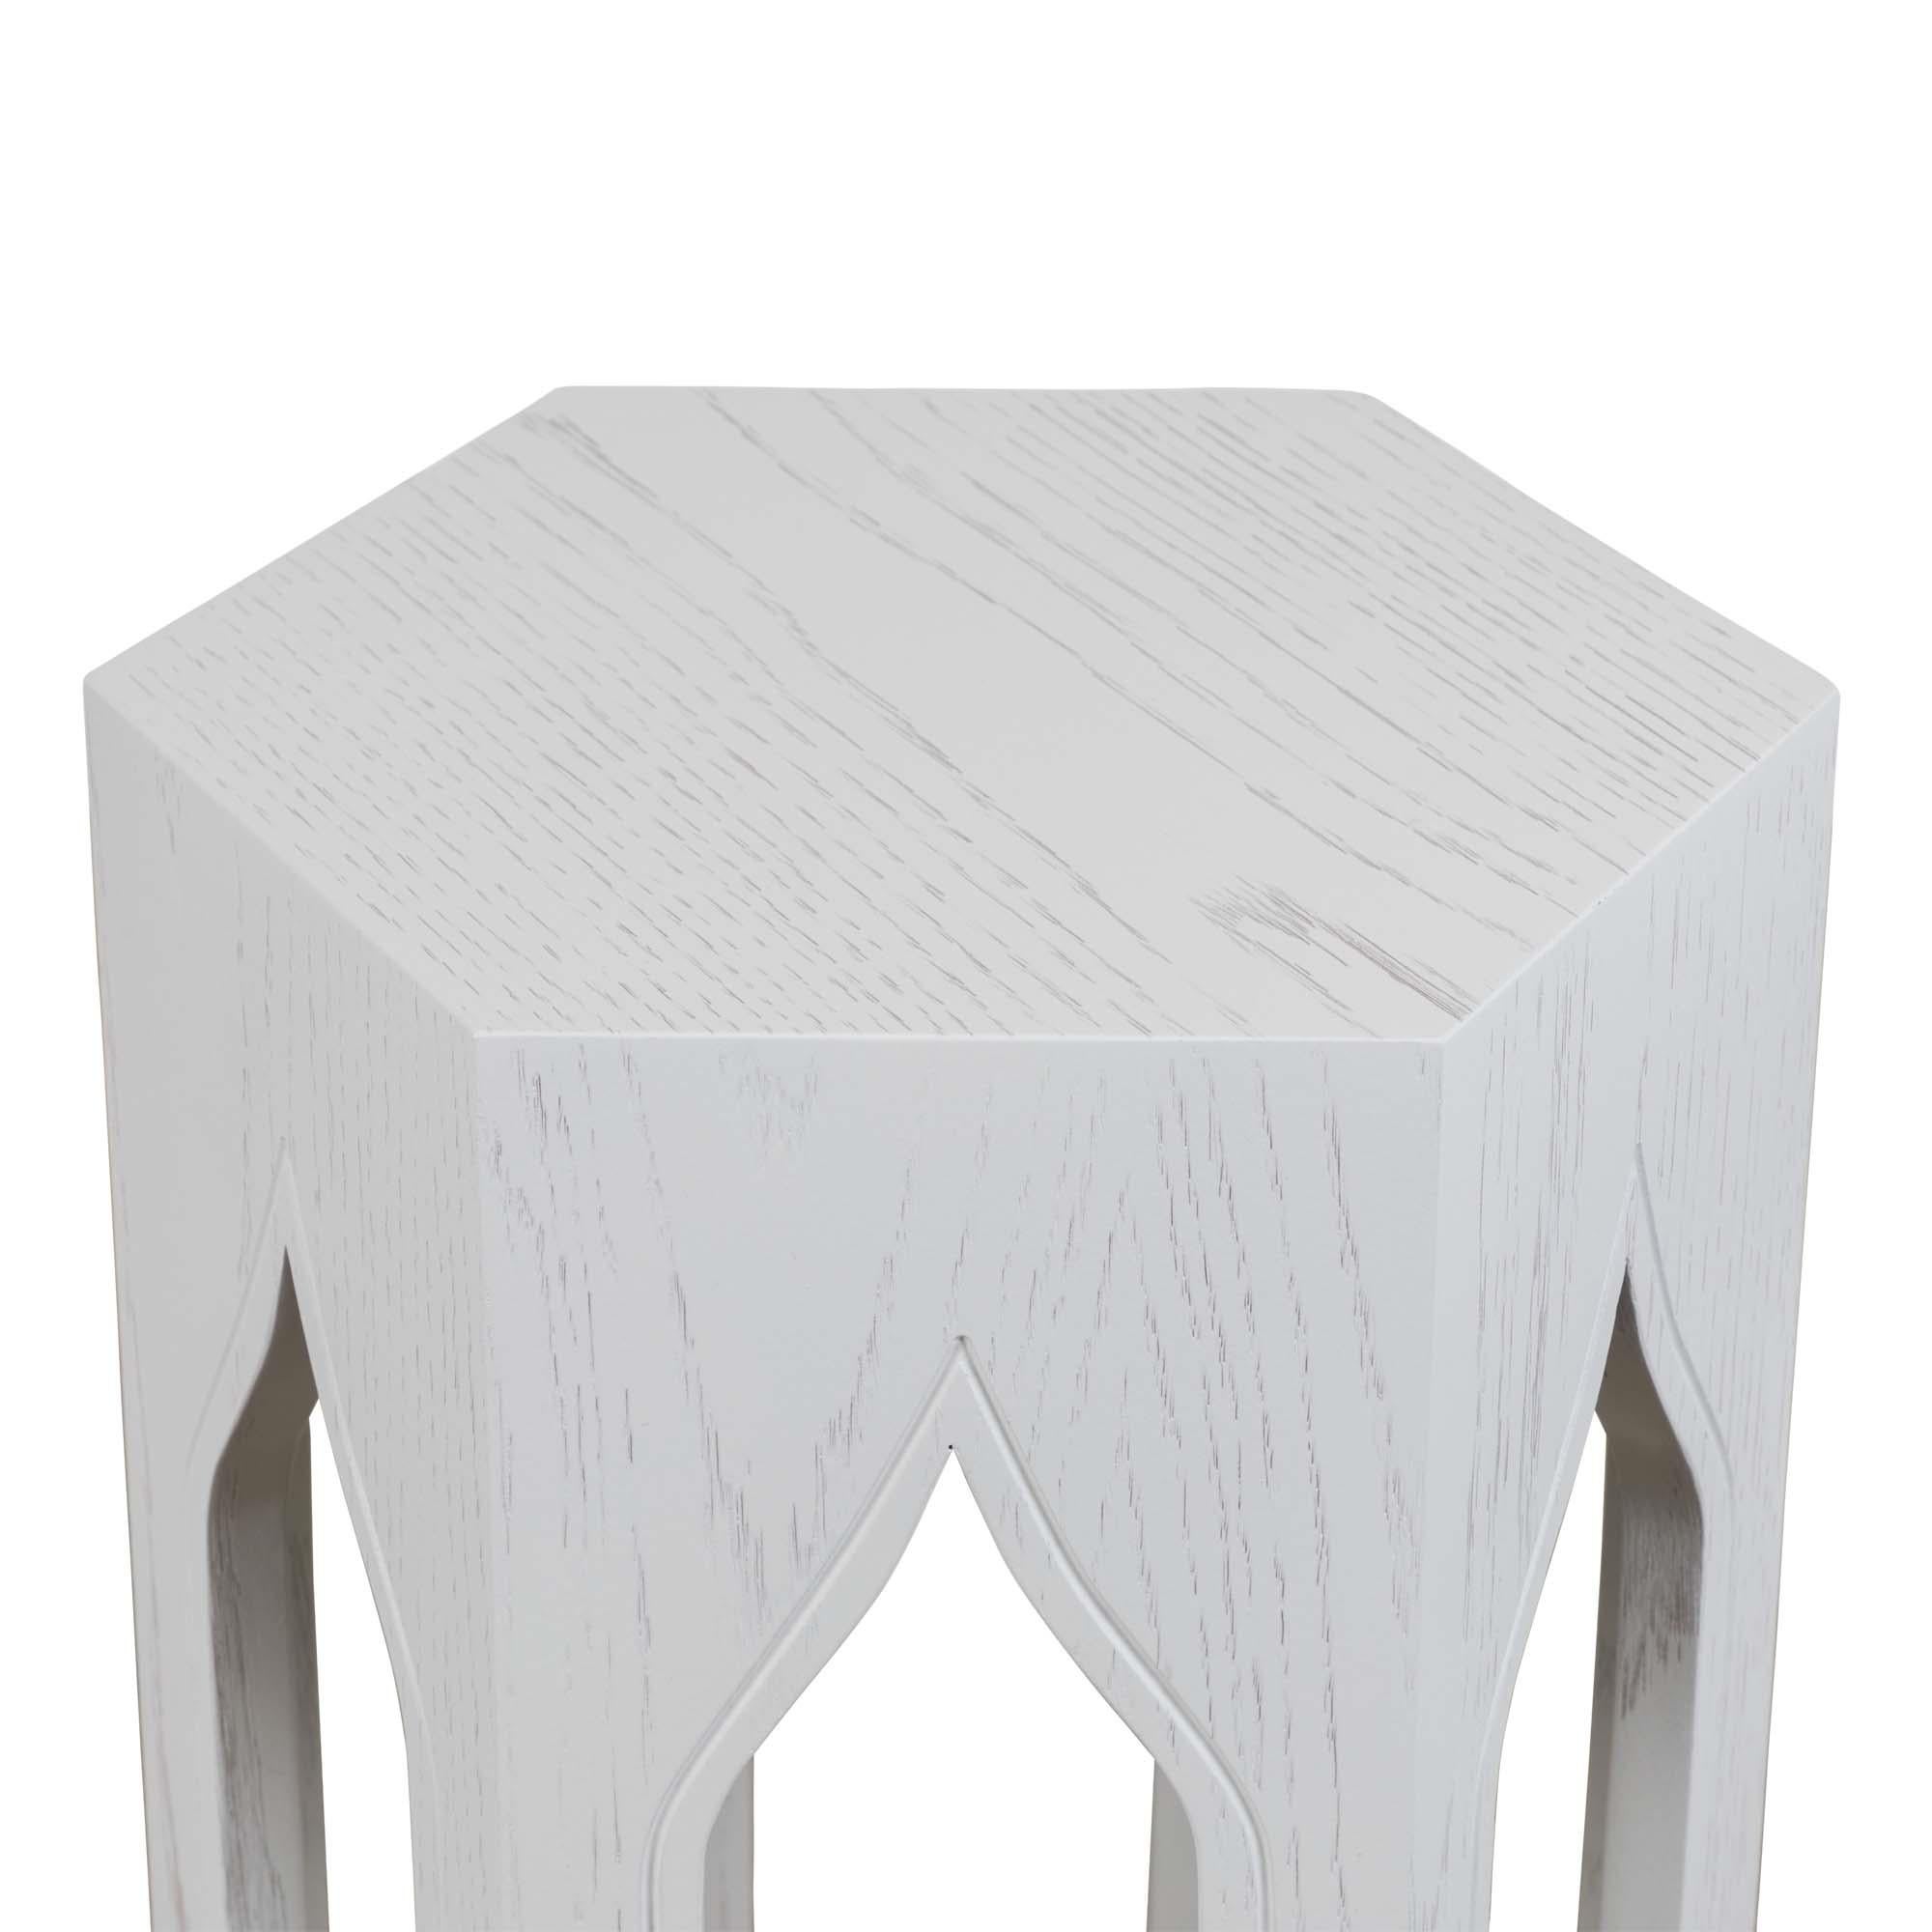 American Small Tabouret Table by Lawson-Fenning